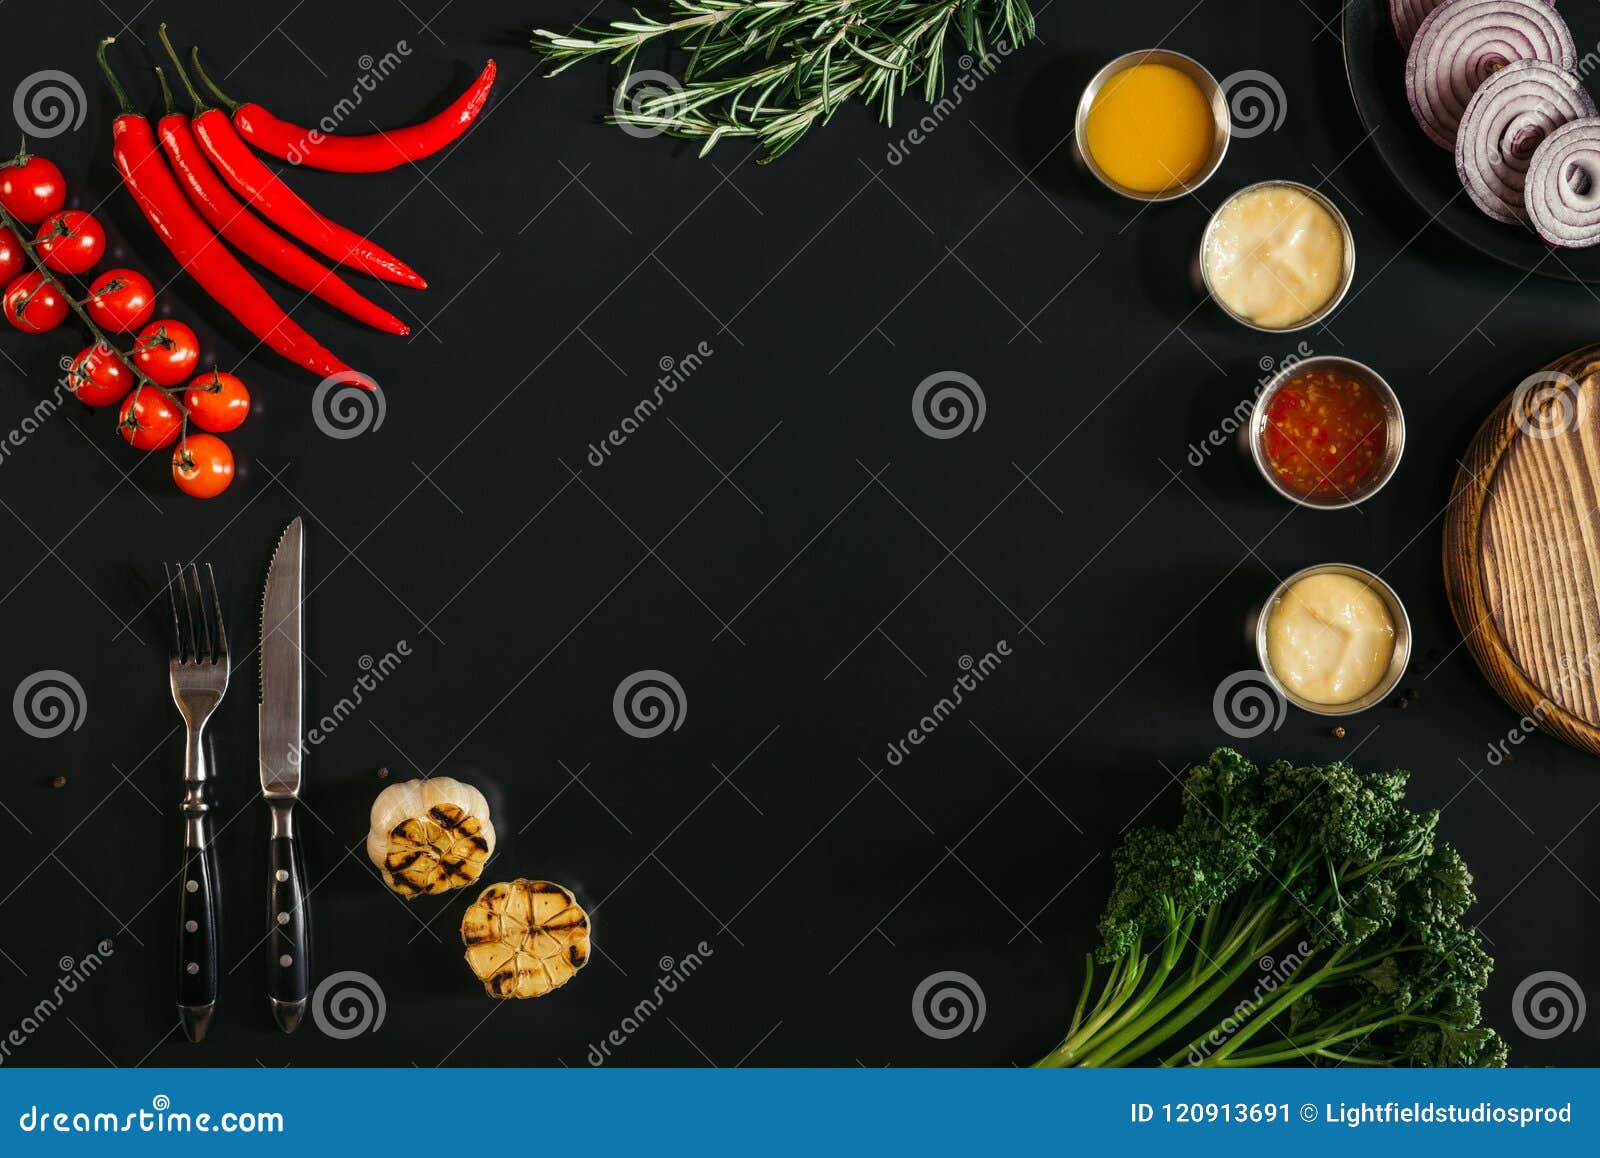 top view of various sauces, grilled garlic, fork with knife and fresh vegetables with herbs